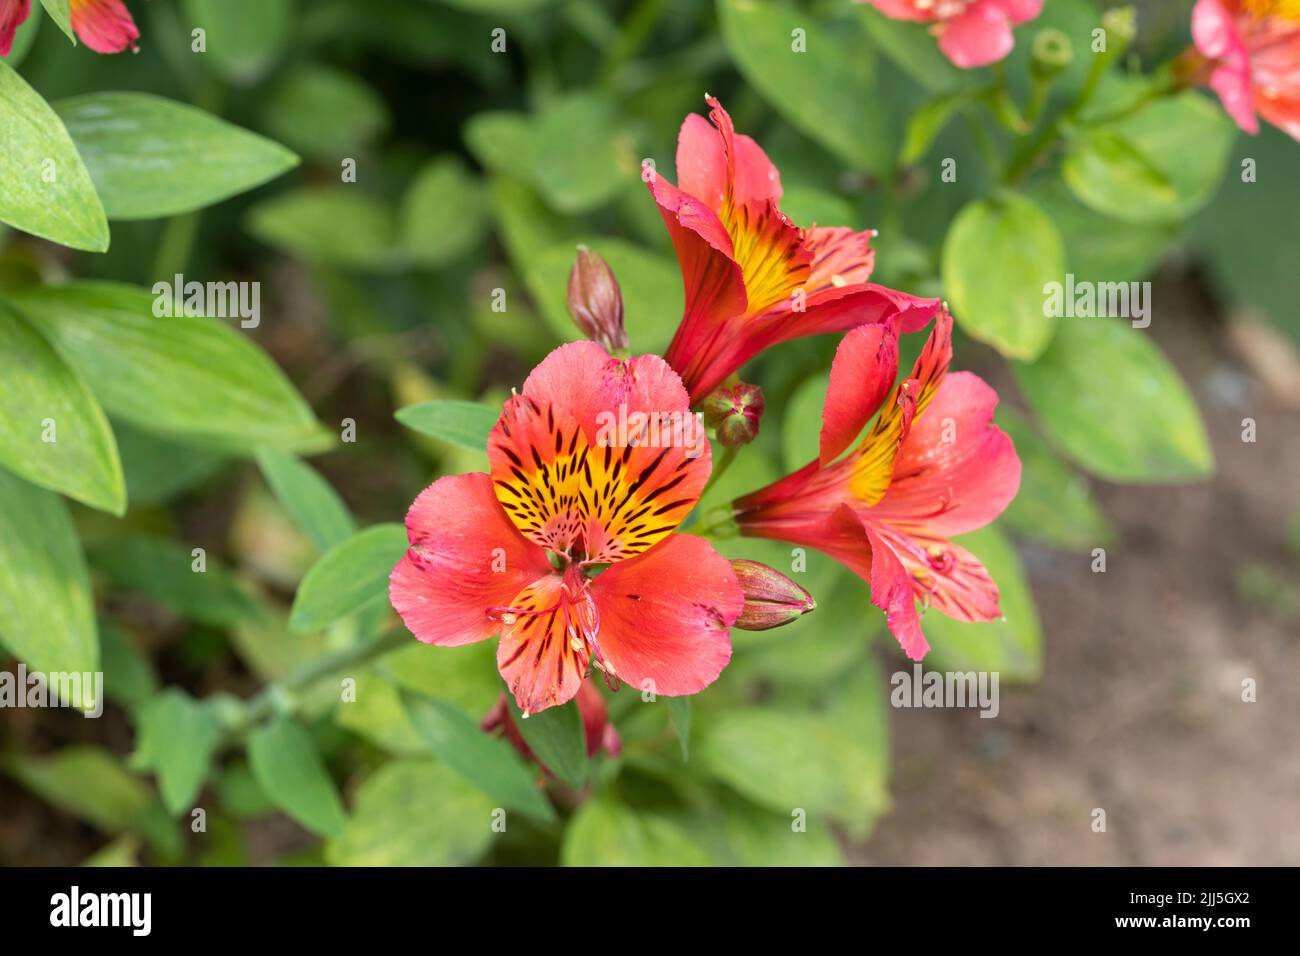 Alstroemeria × hybrida (a hybrid also known as the Peruvian lily pink or lily of the Incas) flowering in a garden in England in July Stock Photo